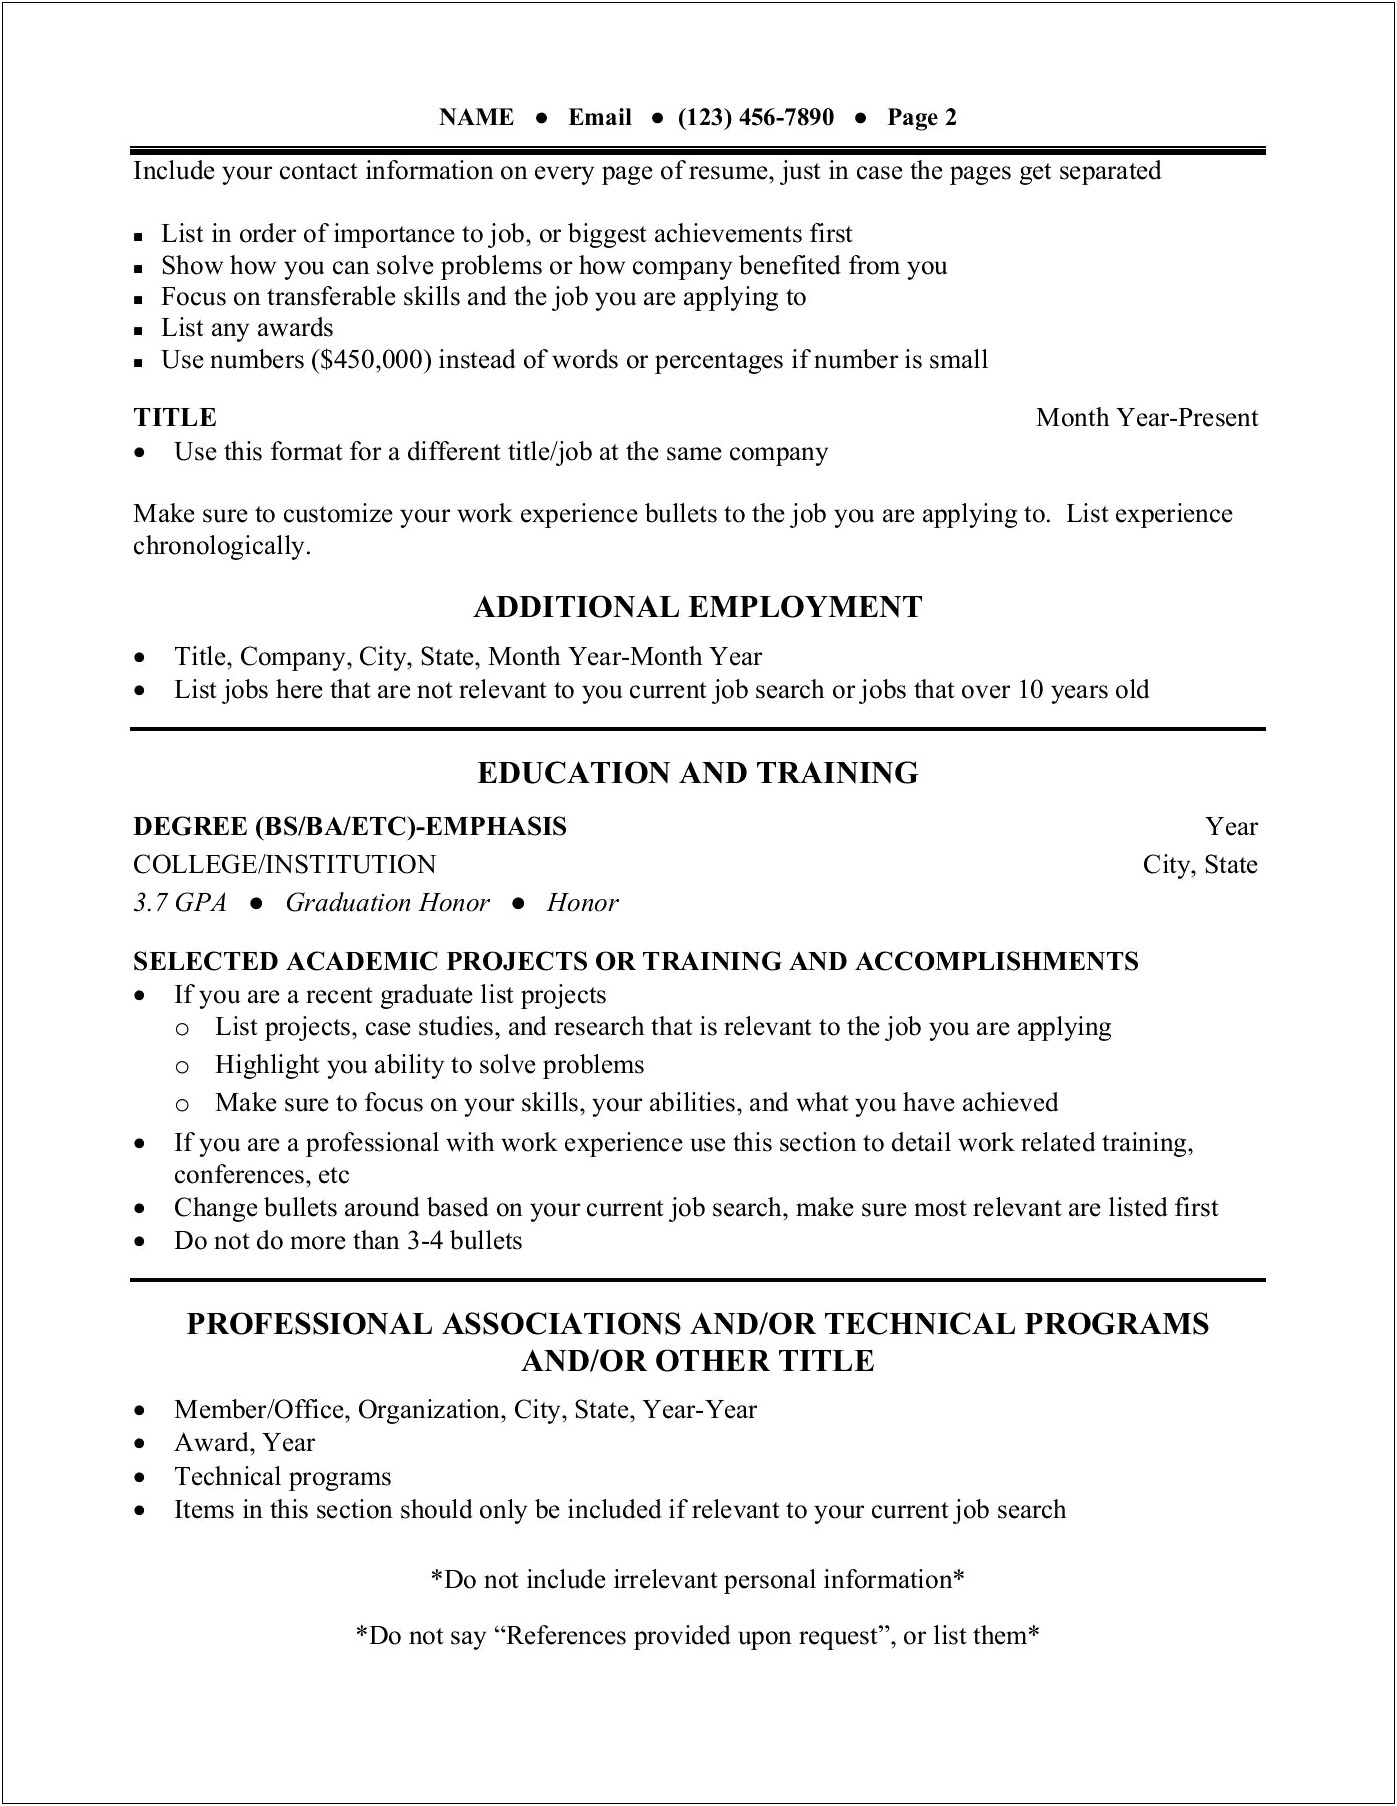 Resume Listing Current Job Example